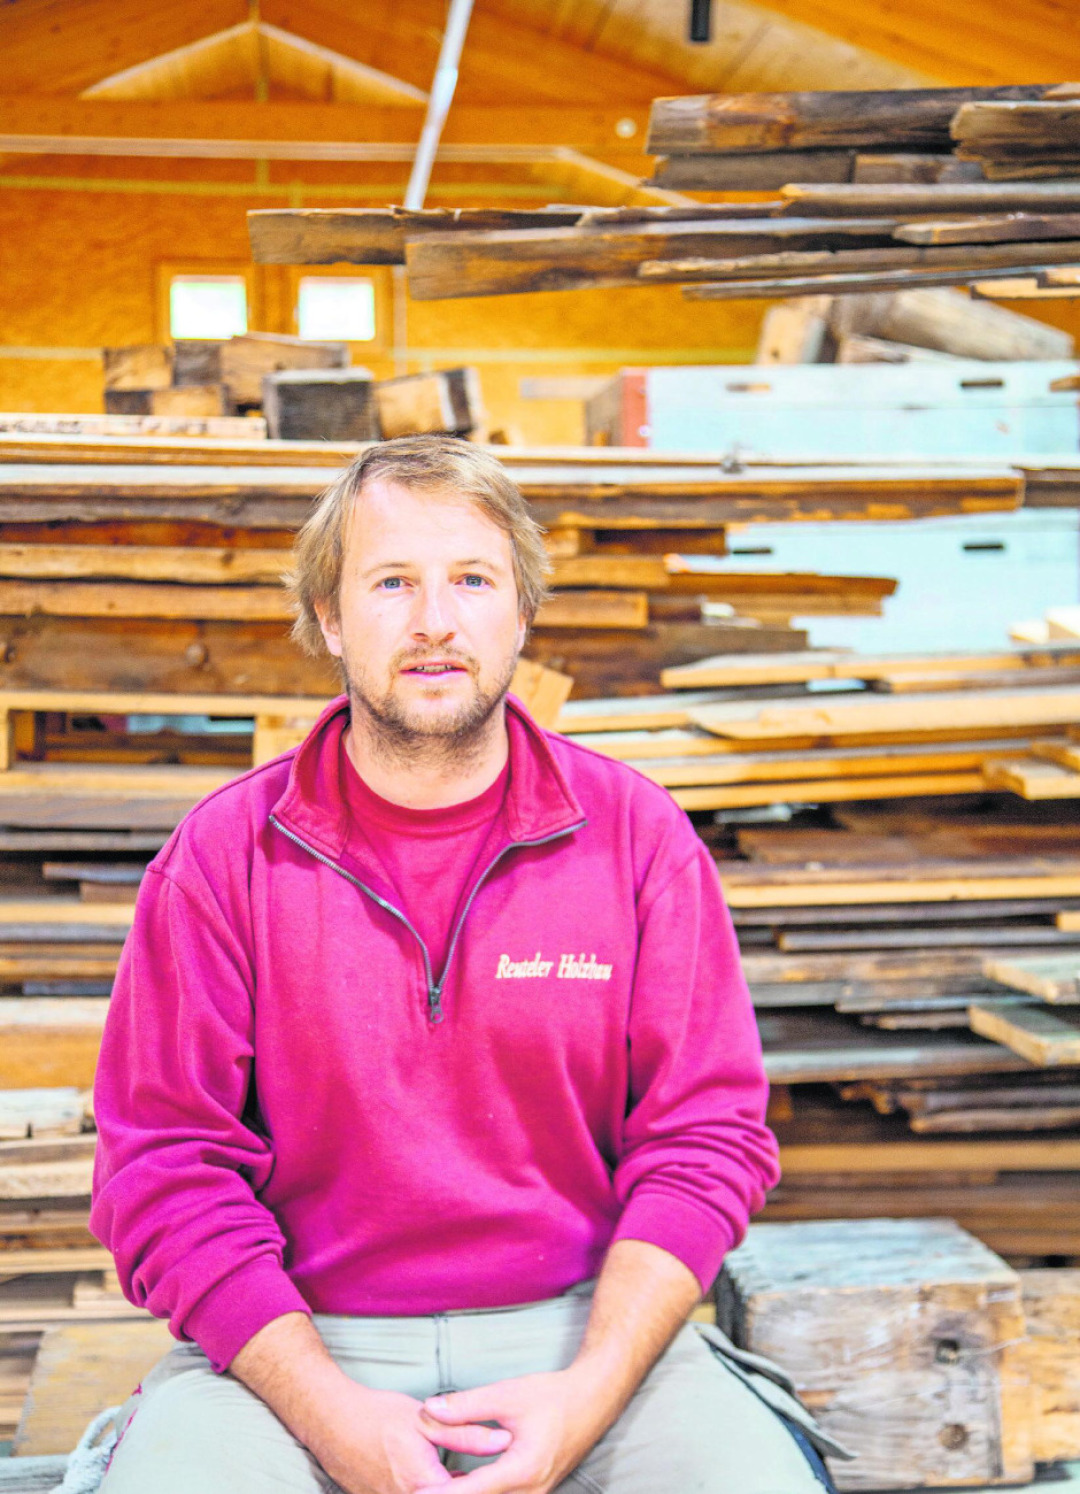 Buildings made of reclaimed wood have a unique aura. The naturally weathered surfaces of antique wood give the entire building a special character. Behind the workshop, Sandro keeps his carpenters